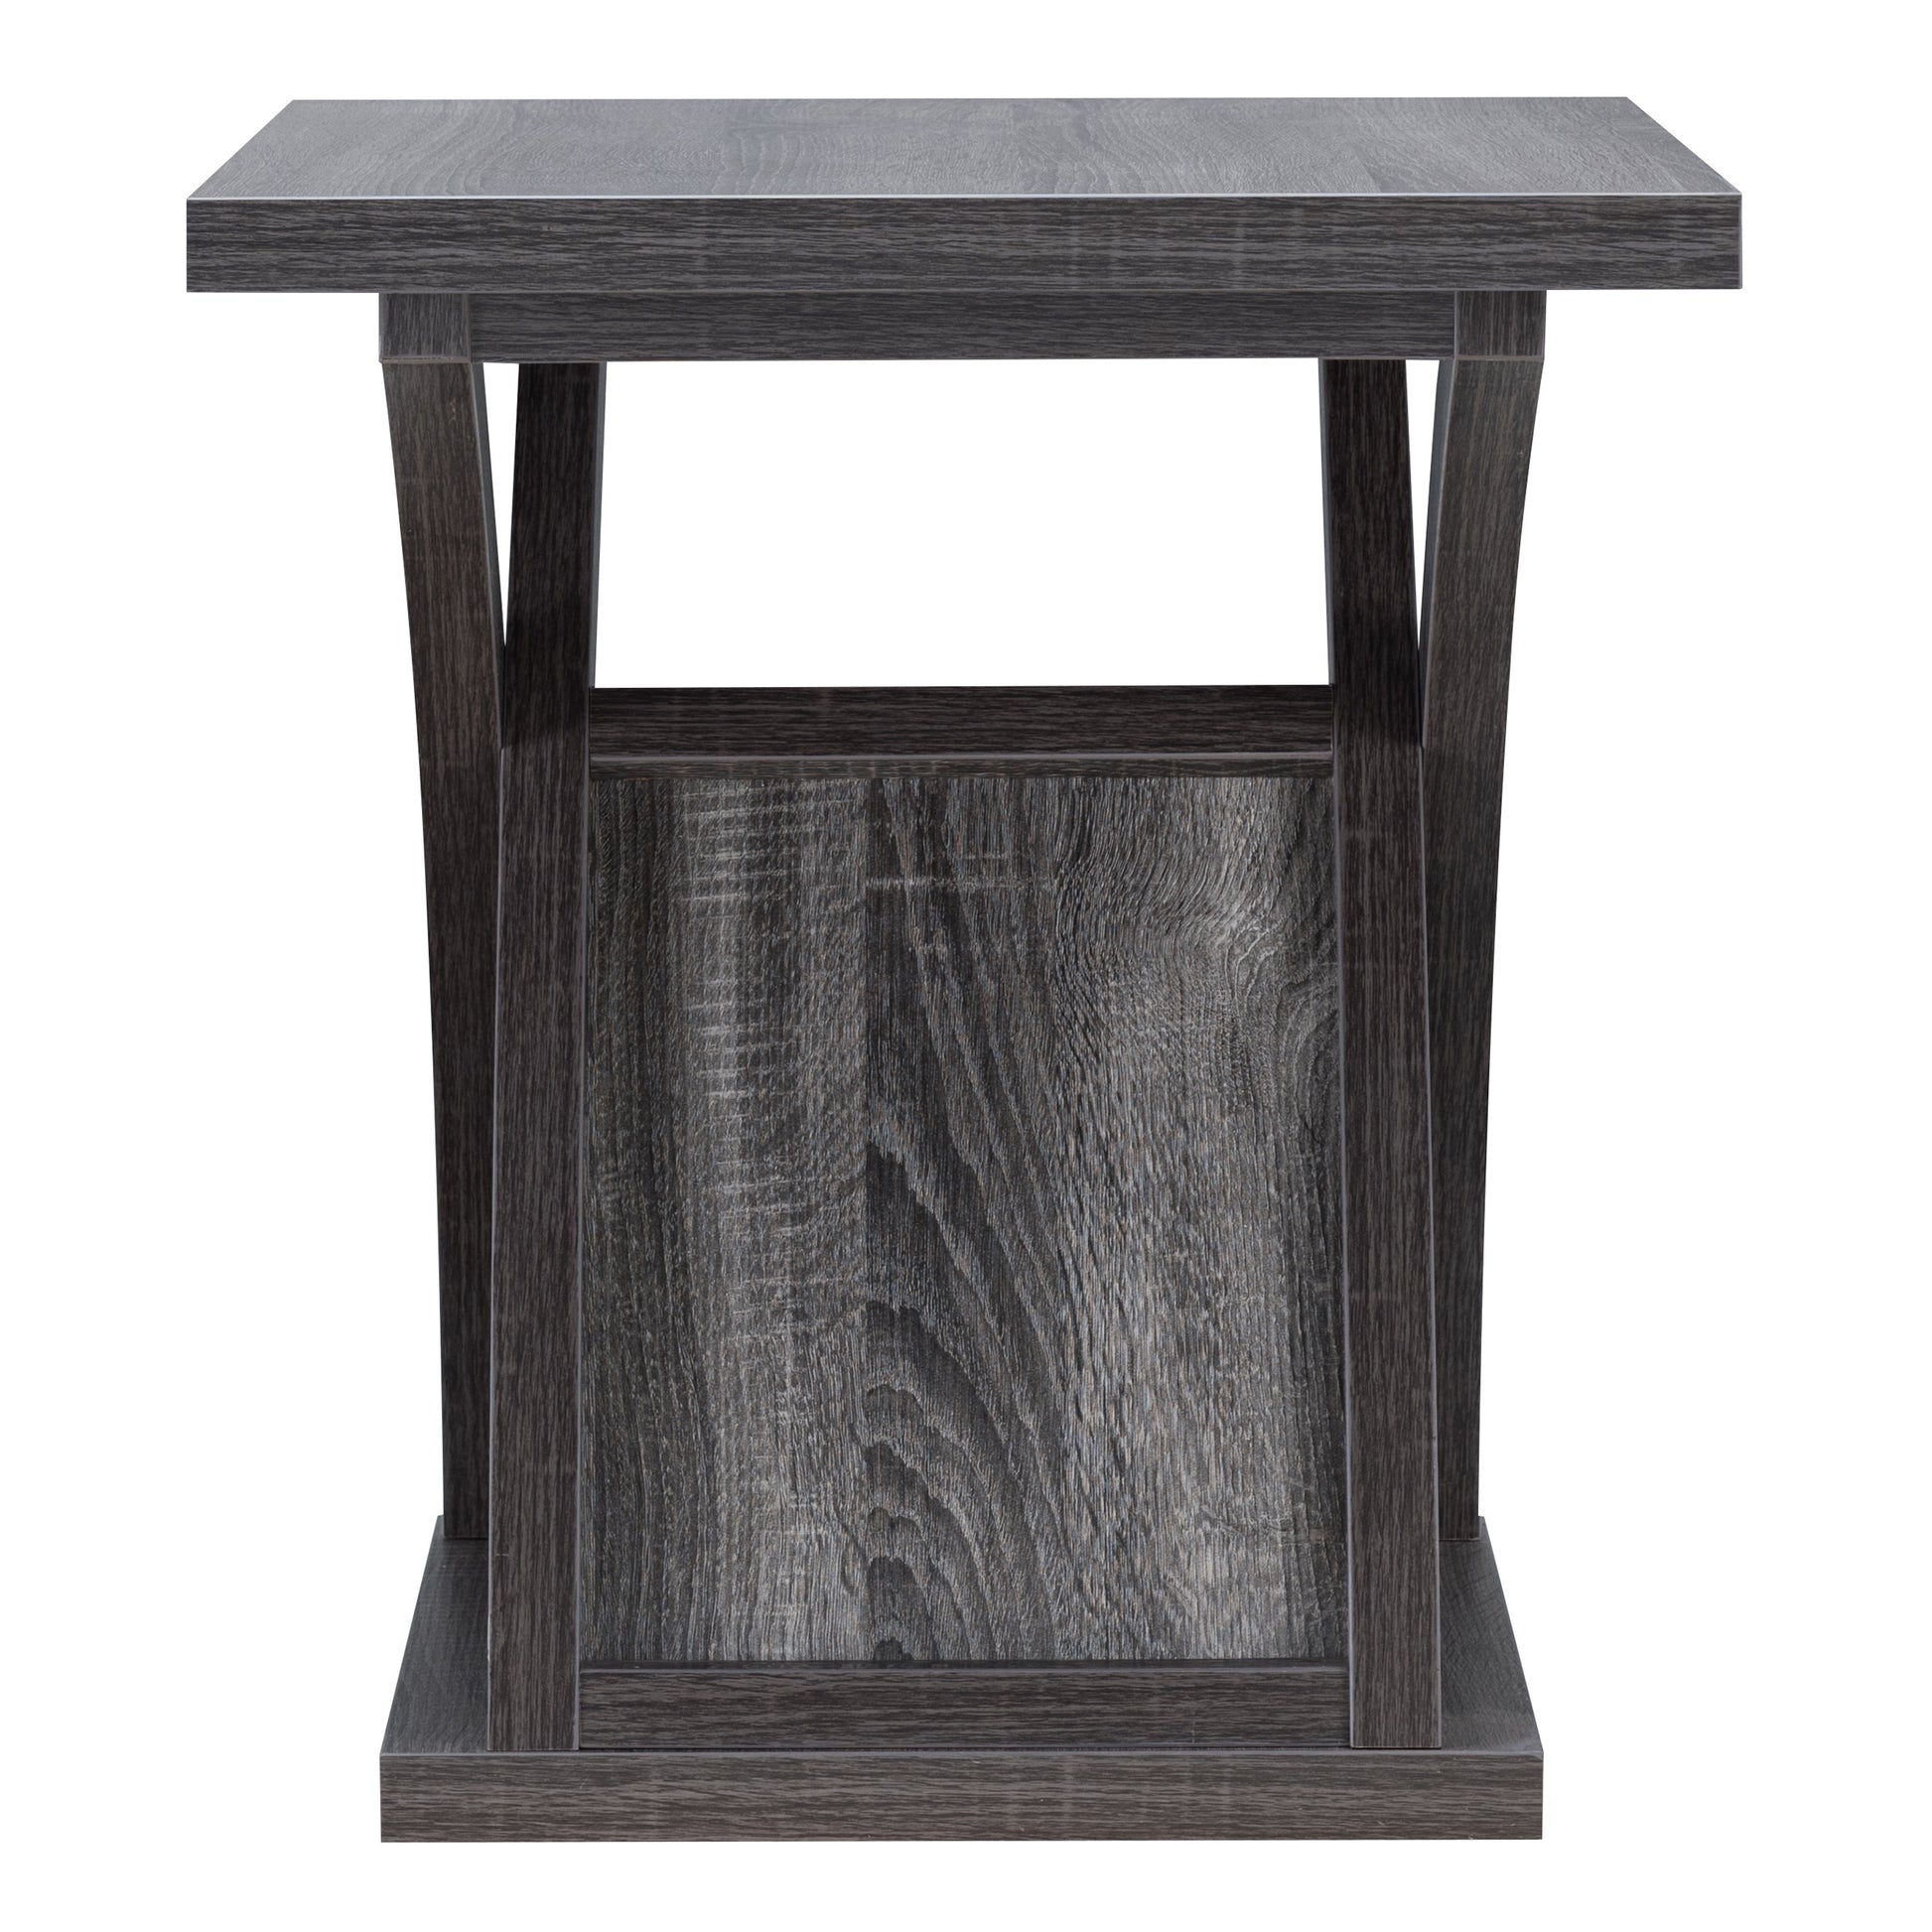 Front-facing side view of a contemporary distressed gray X-base end table on a white background